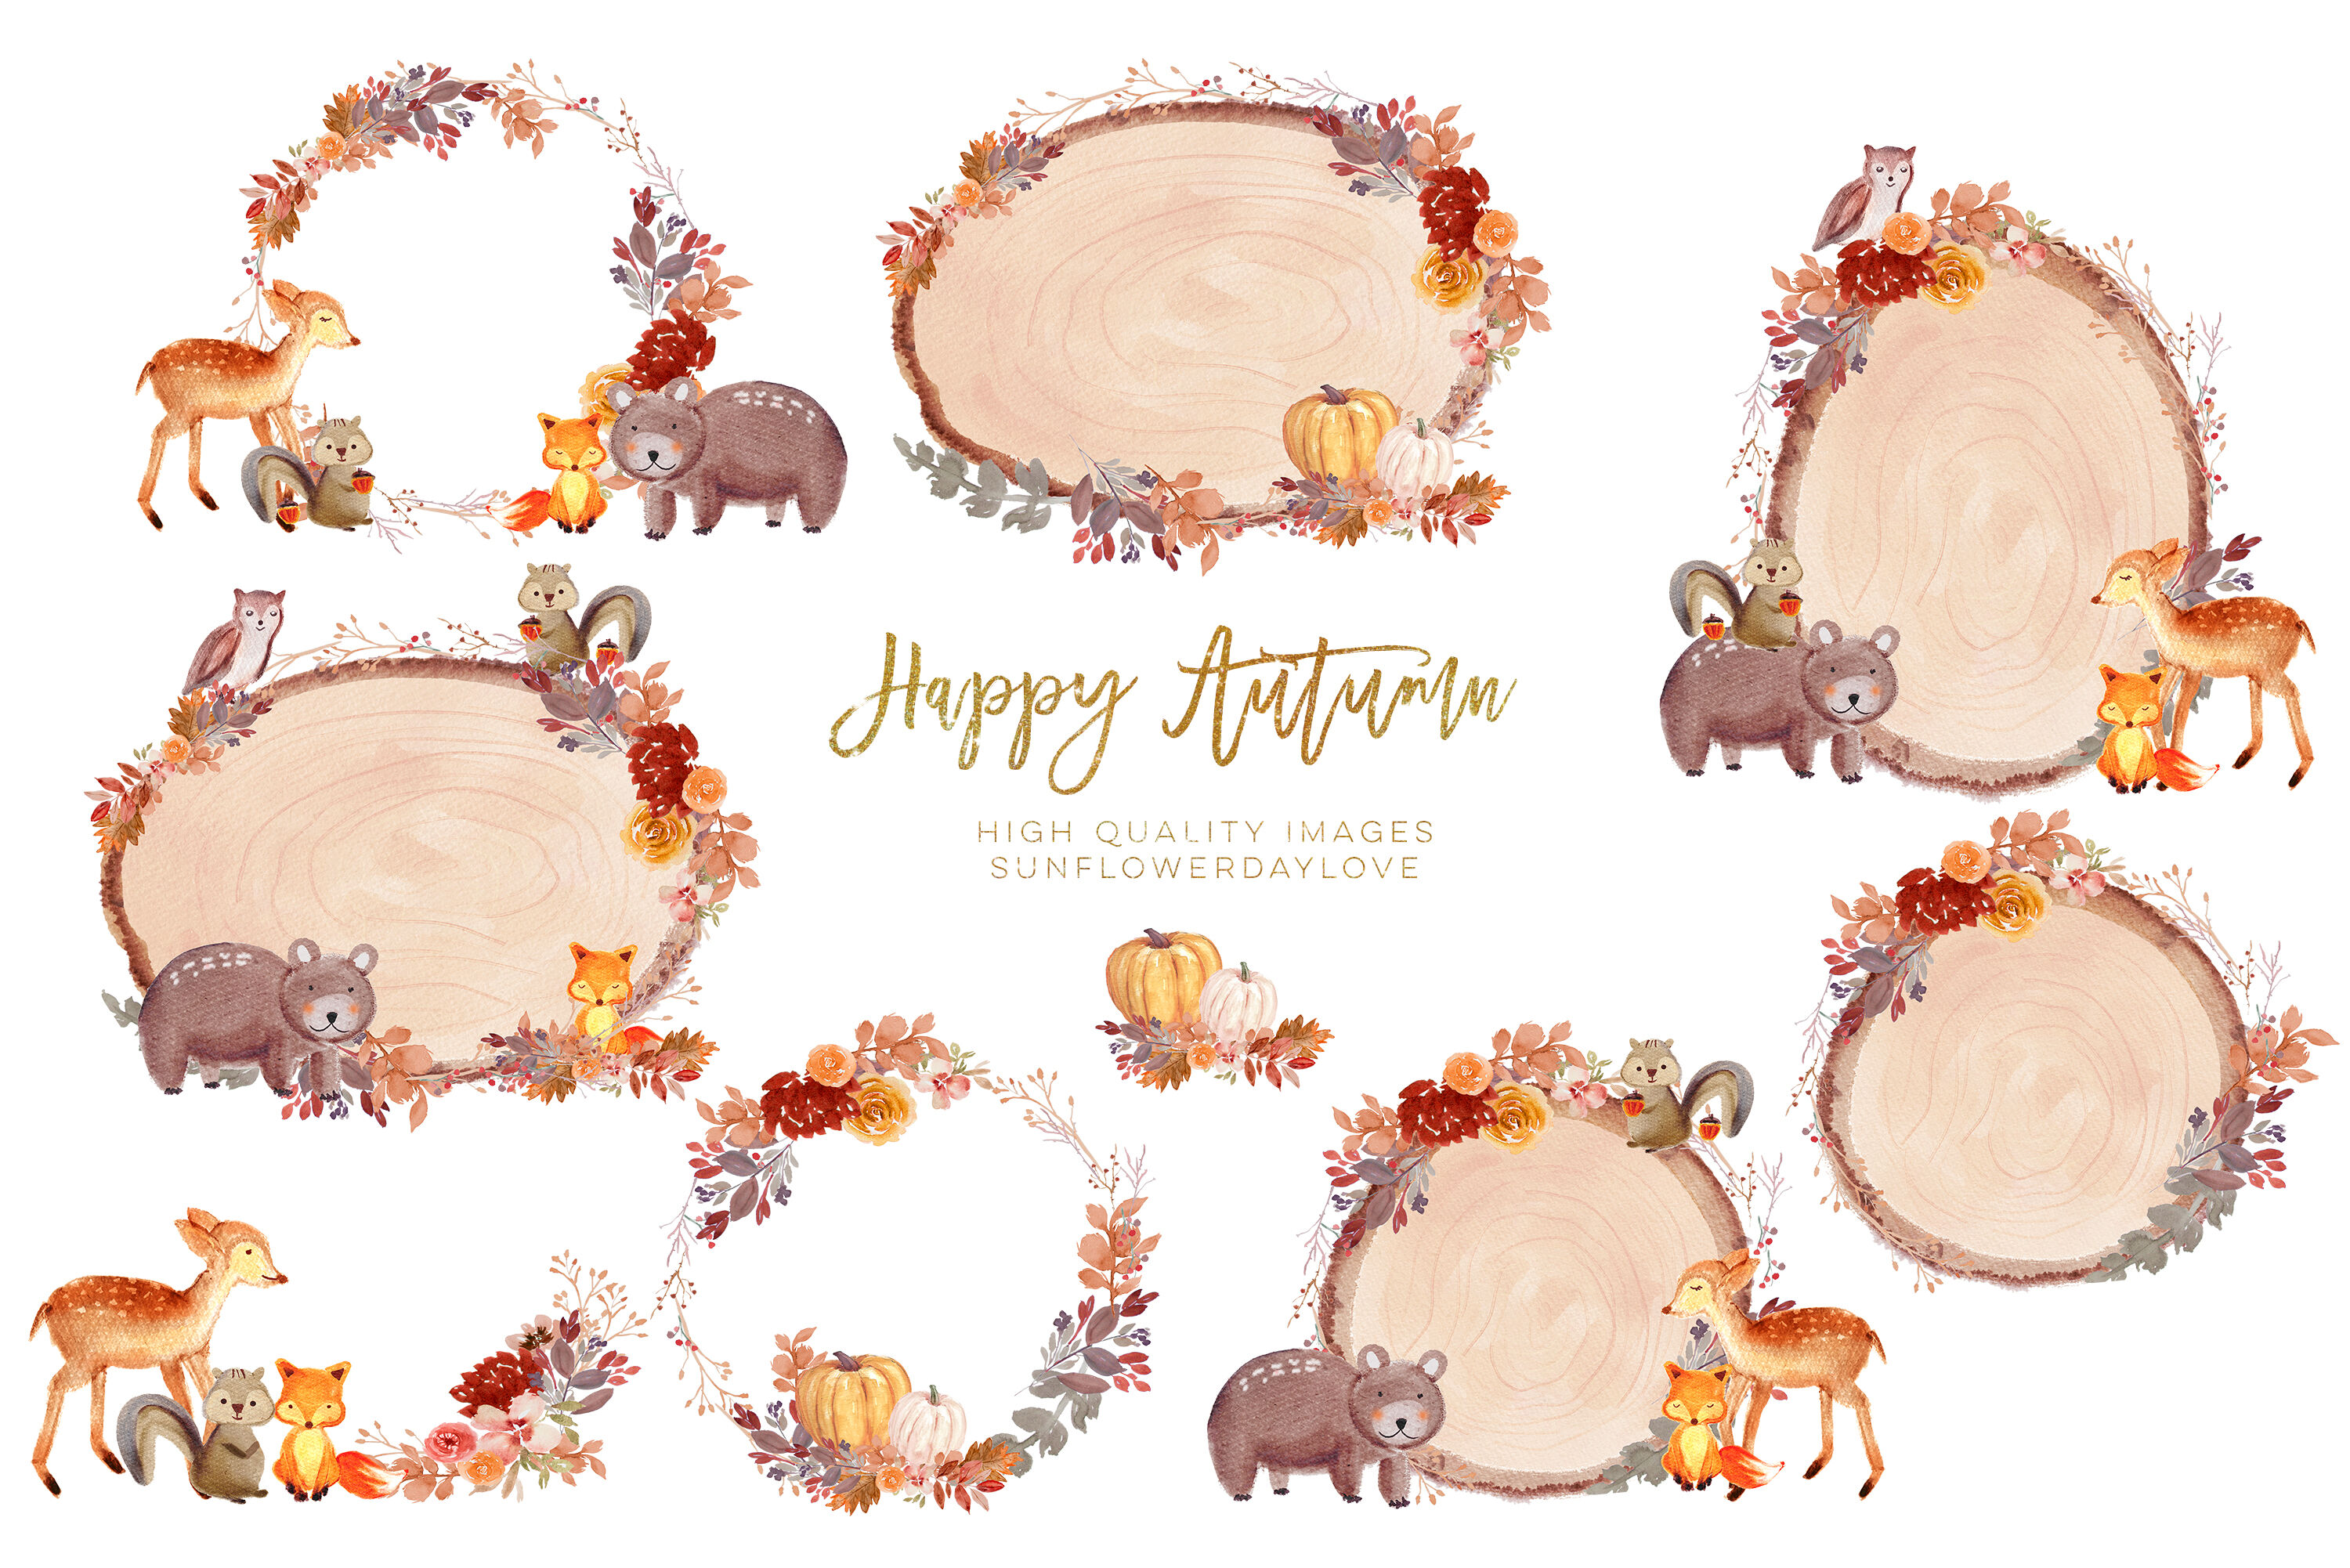 Woodland Animals Watercolor Frames Clipart, Forest Animal Clip Art By  Sunflower Day Love | TheHungryJPEG